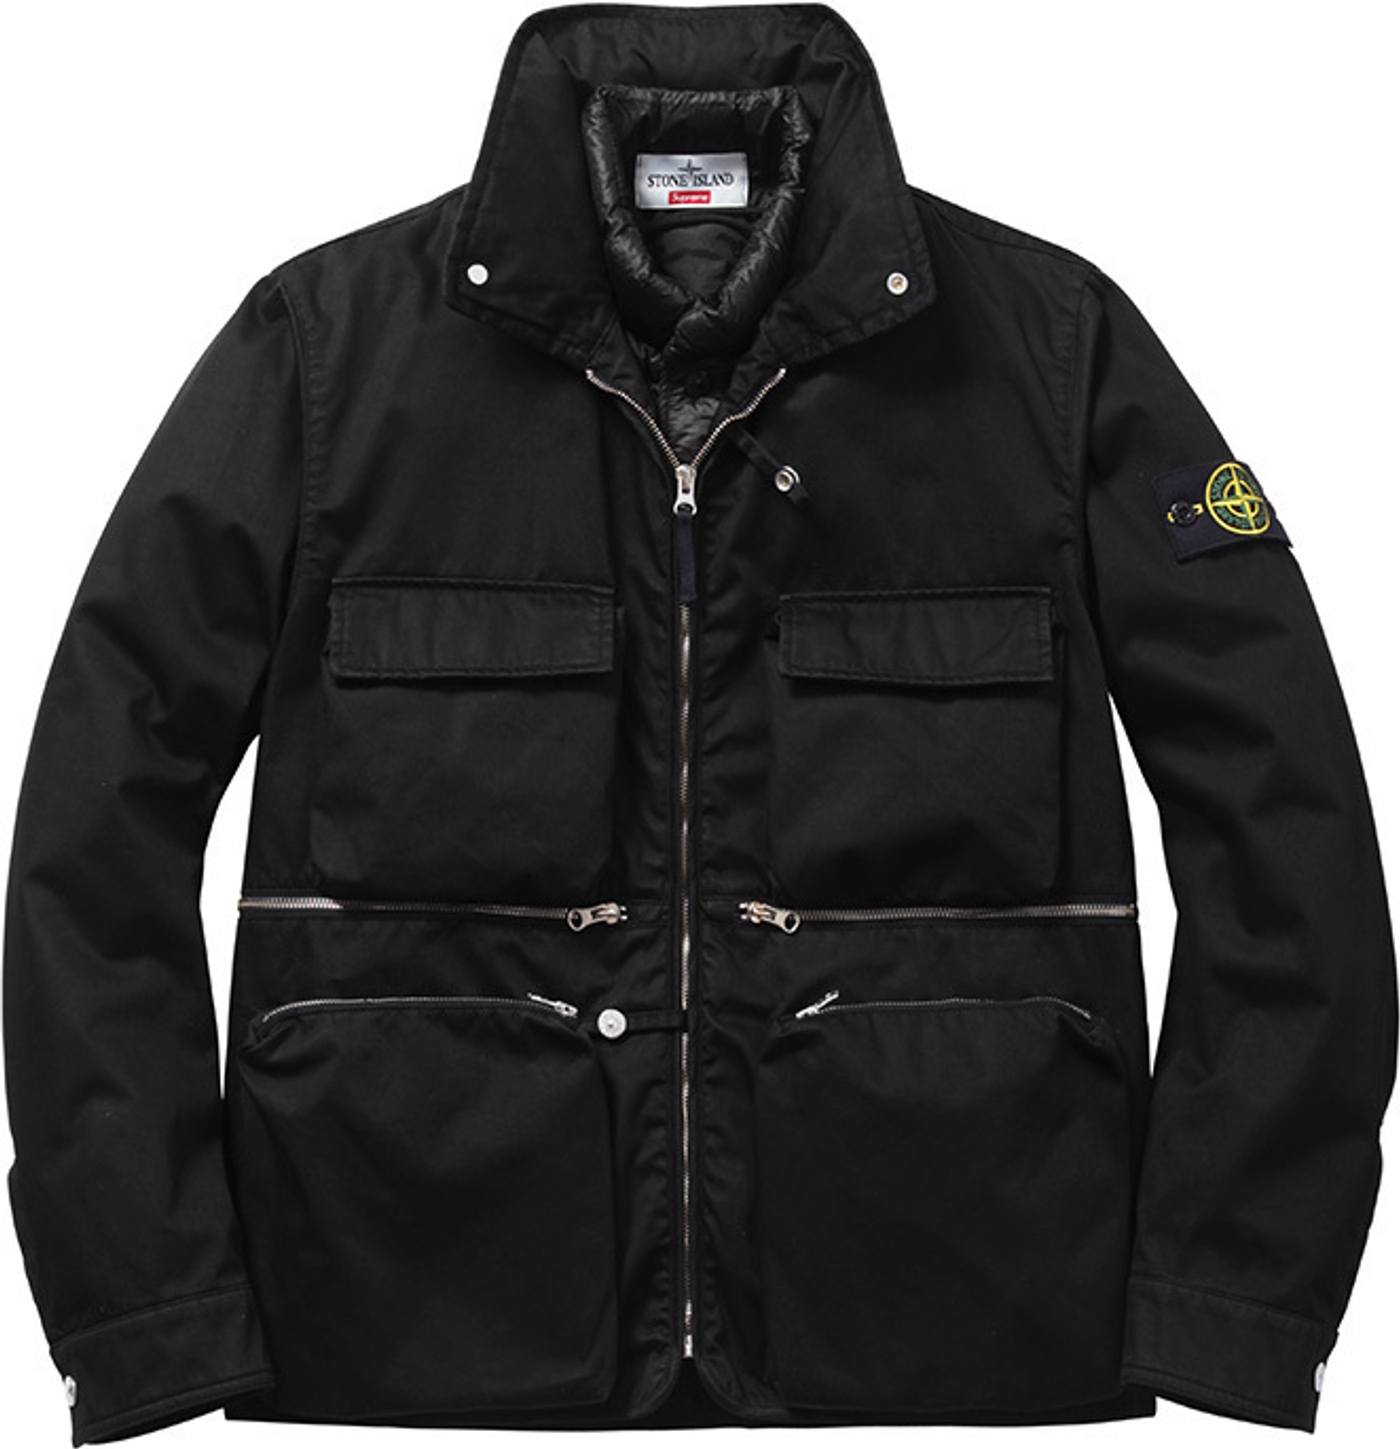 Raso Gommato Cover Nero Jacket 
Wind and water-resistant cotton with removable down liner. Removable eye mask with stow away hood.<br>
Made by Stone Island<br> (22/36)